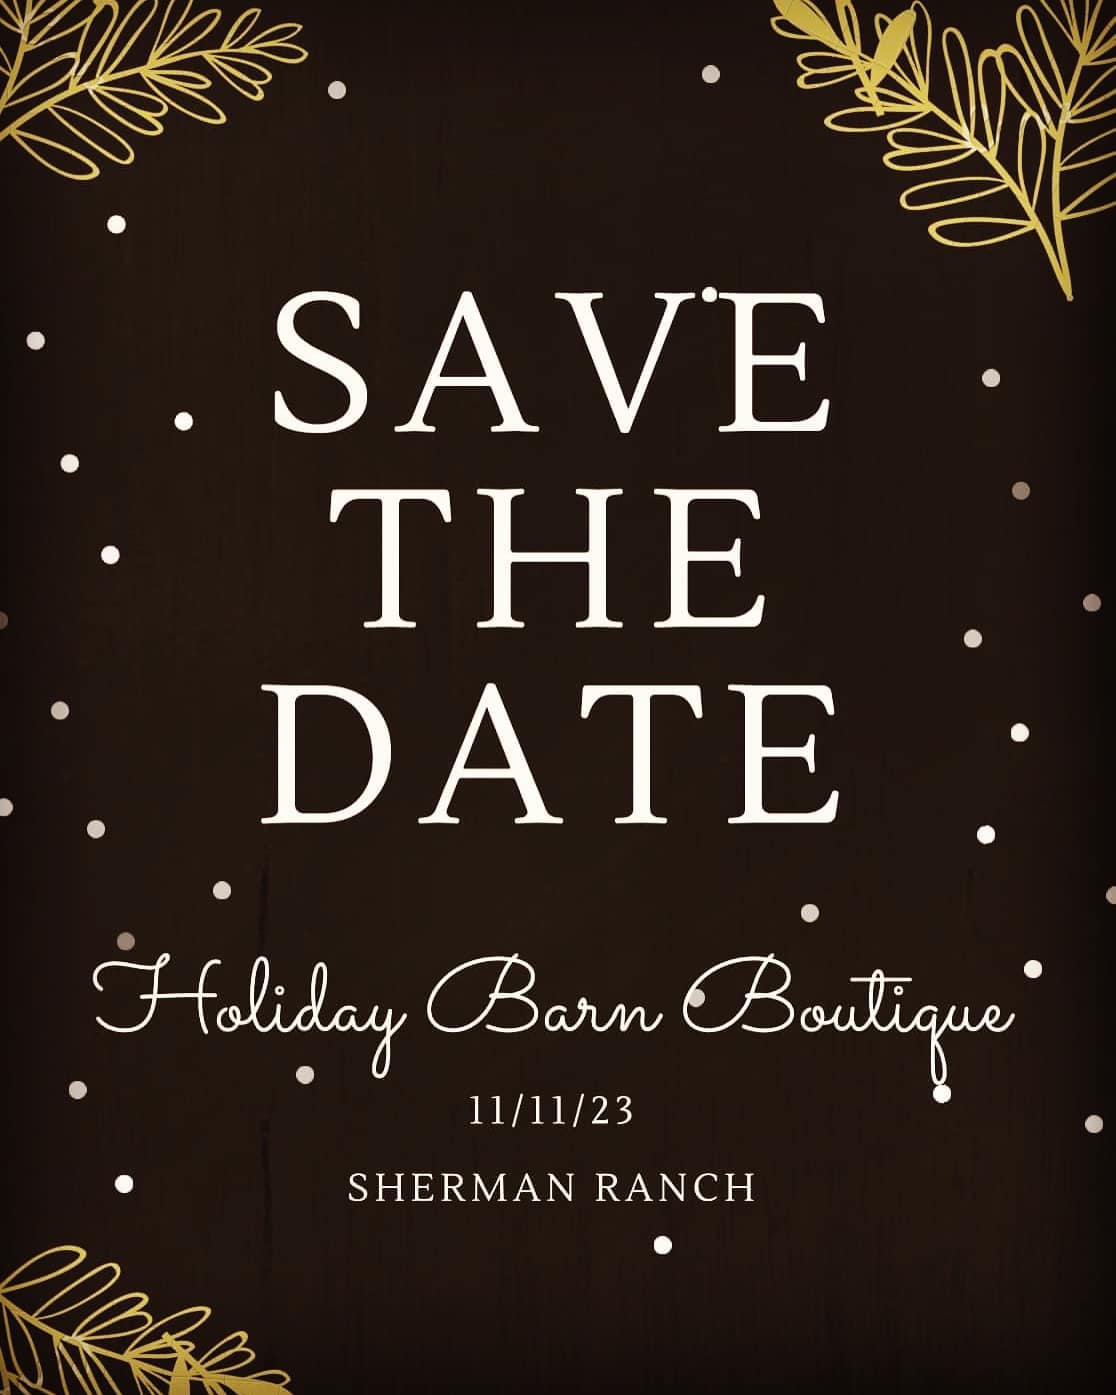 Save The Date - 2023 Sherman Ranch Holiday Barn Boutique